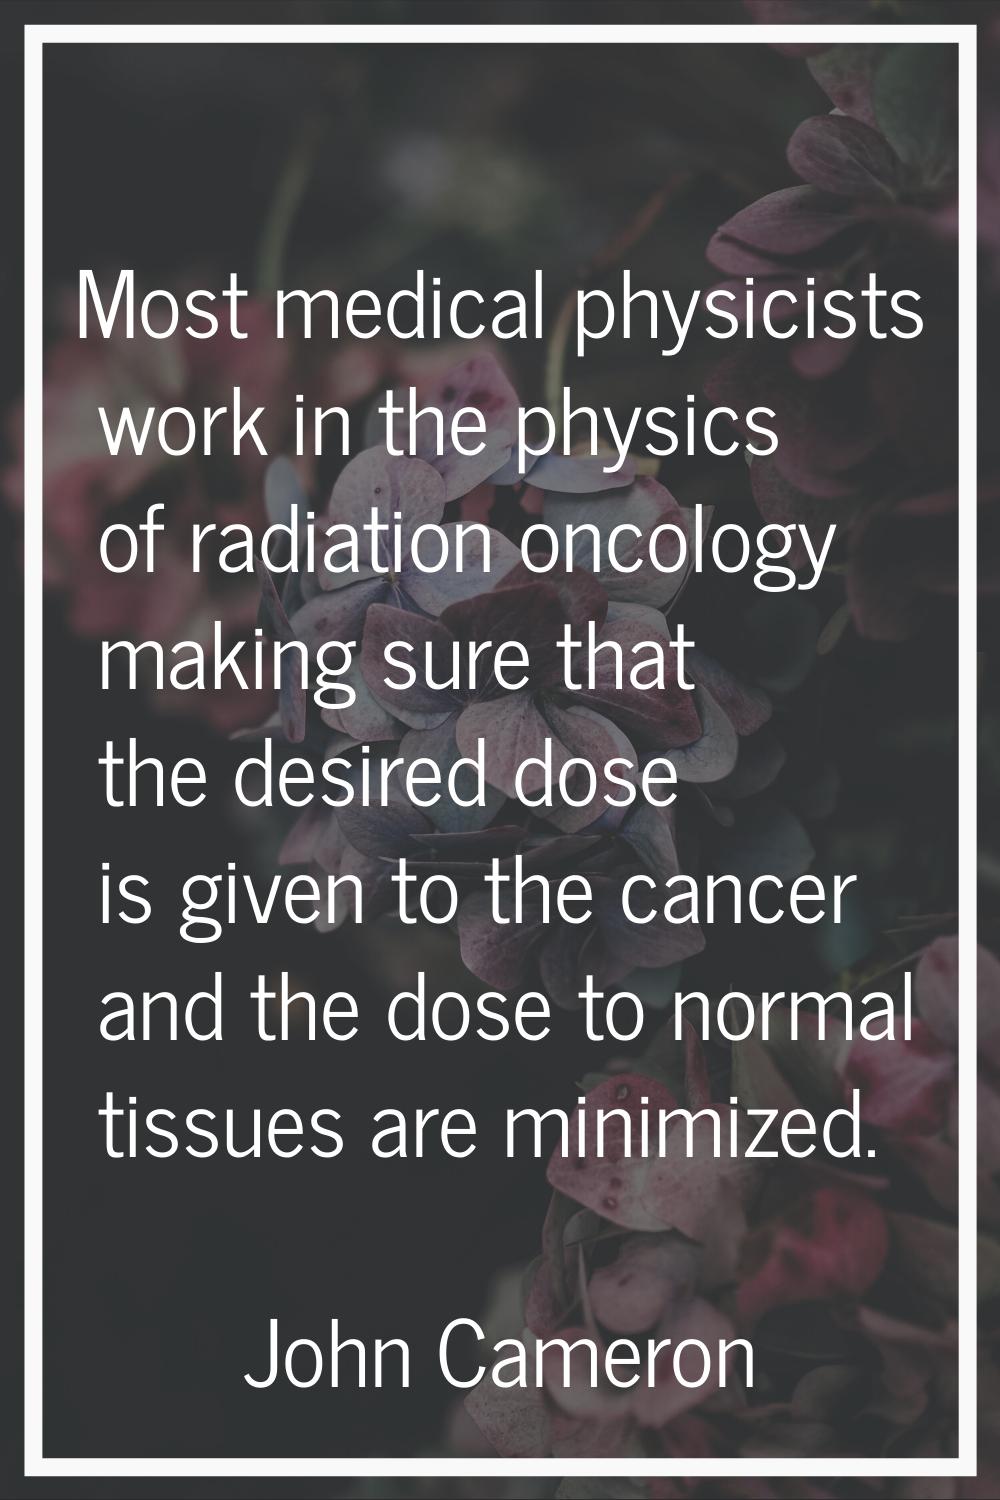 Most medical physicists work in the physics of radiation oncology making sure that the desired dose